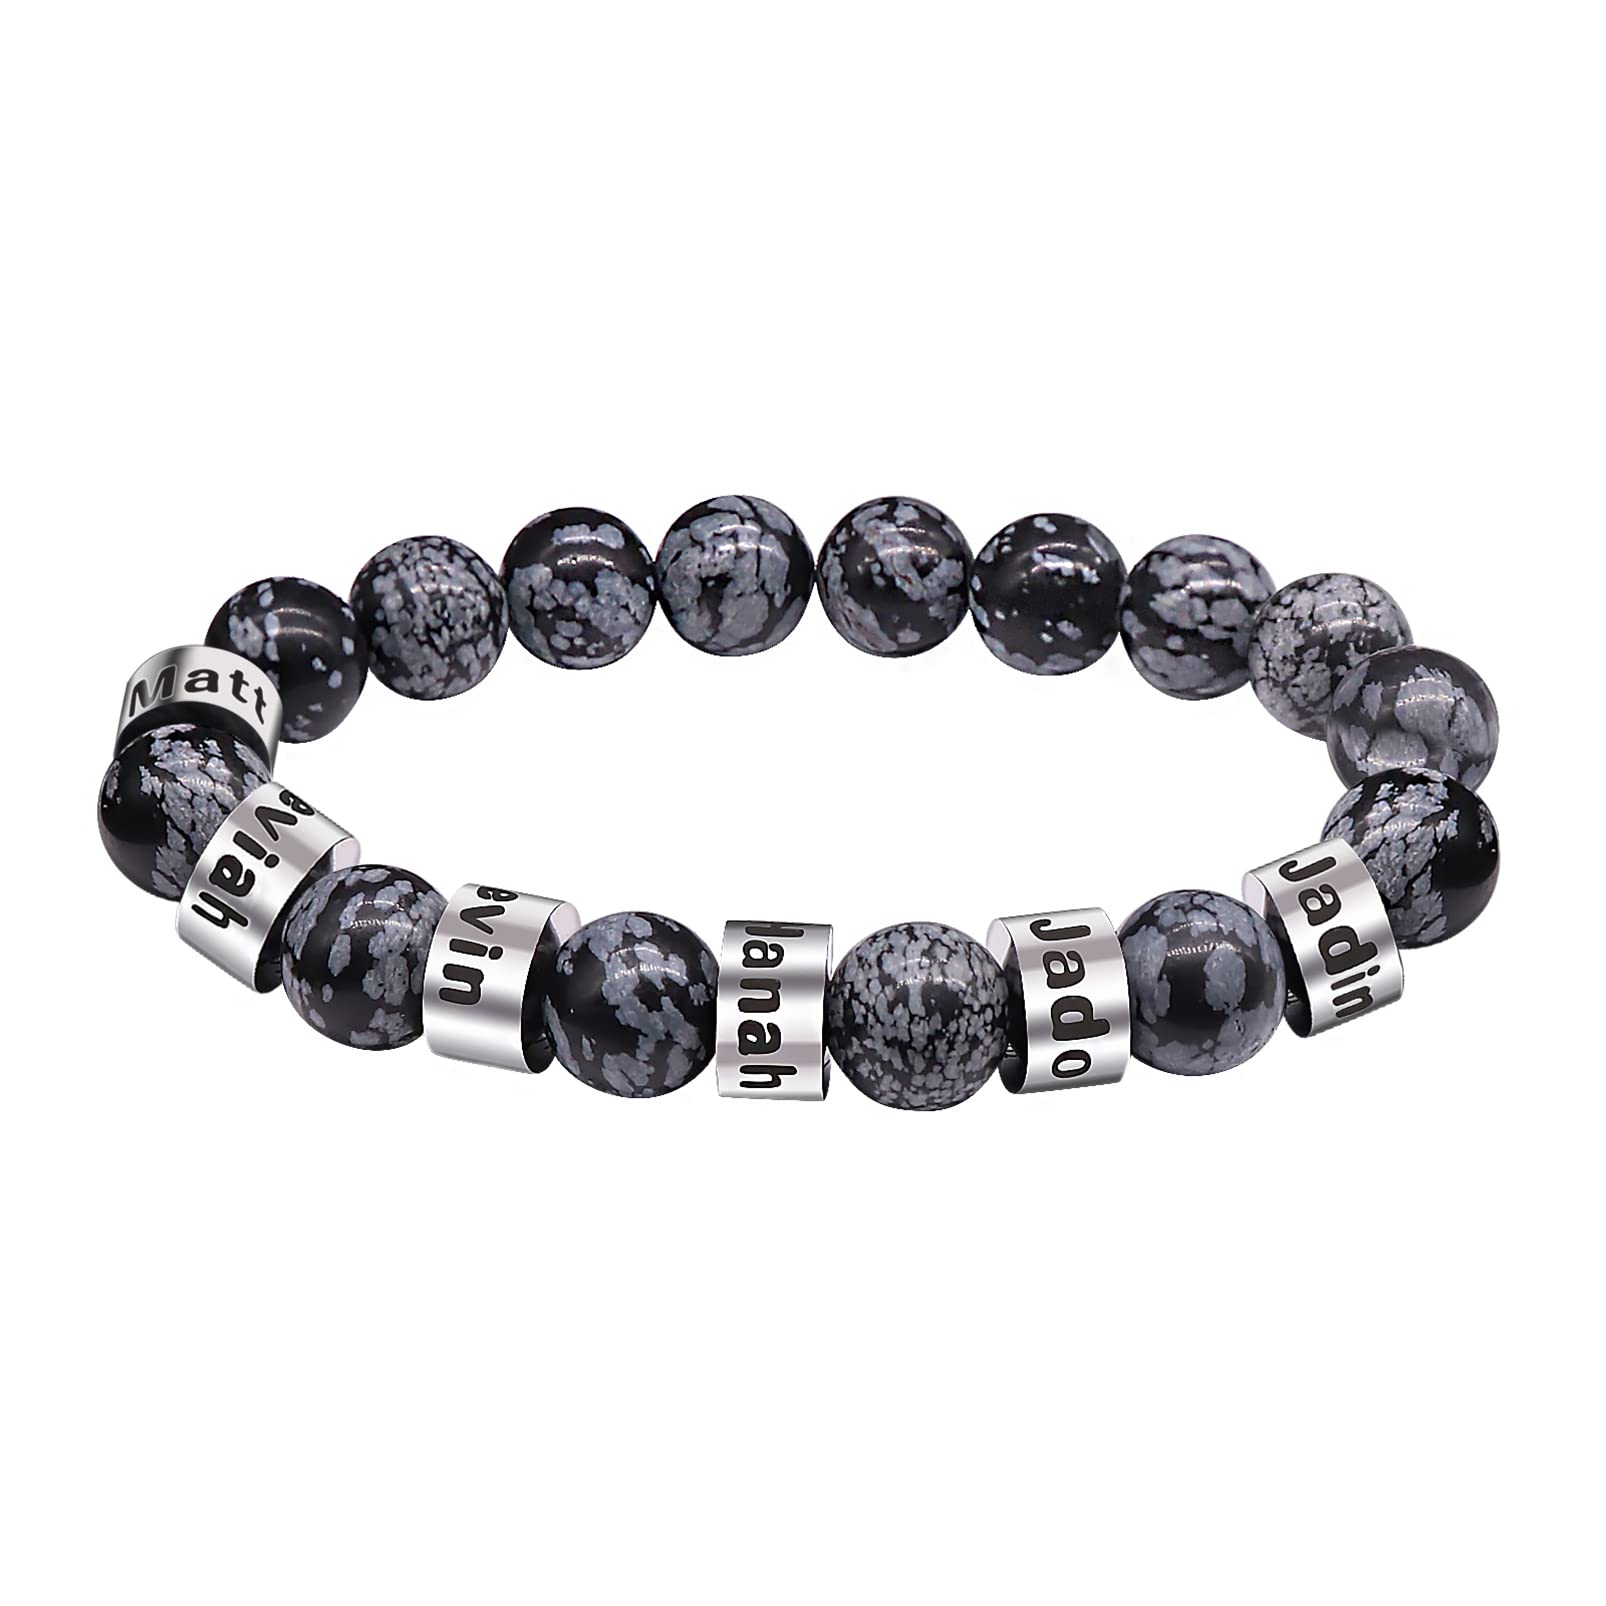 Personalized Stone Beads Bracelets with Name Lava Beads Engraved for Men-YITUB